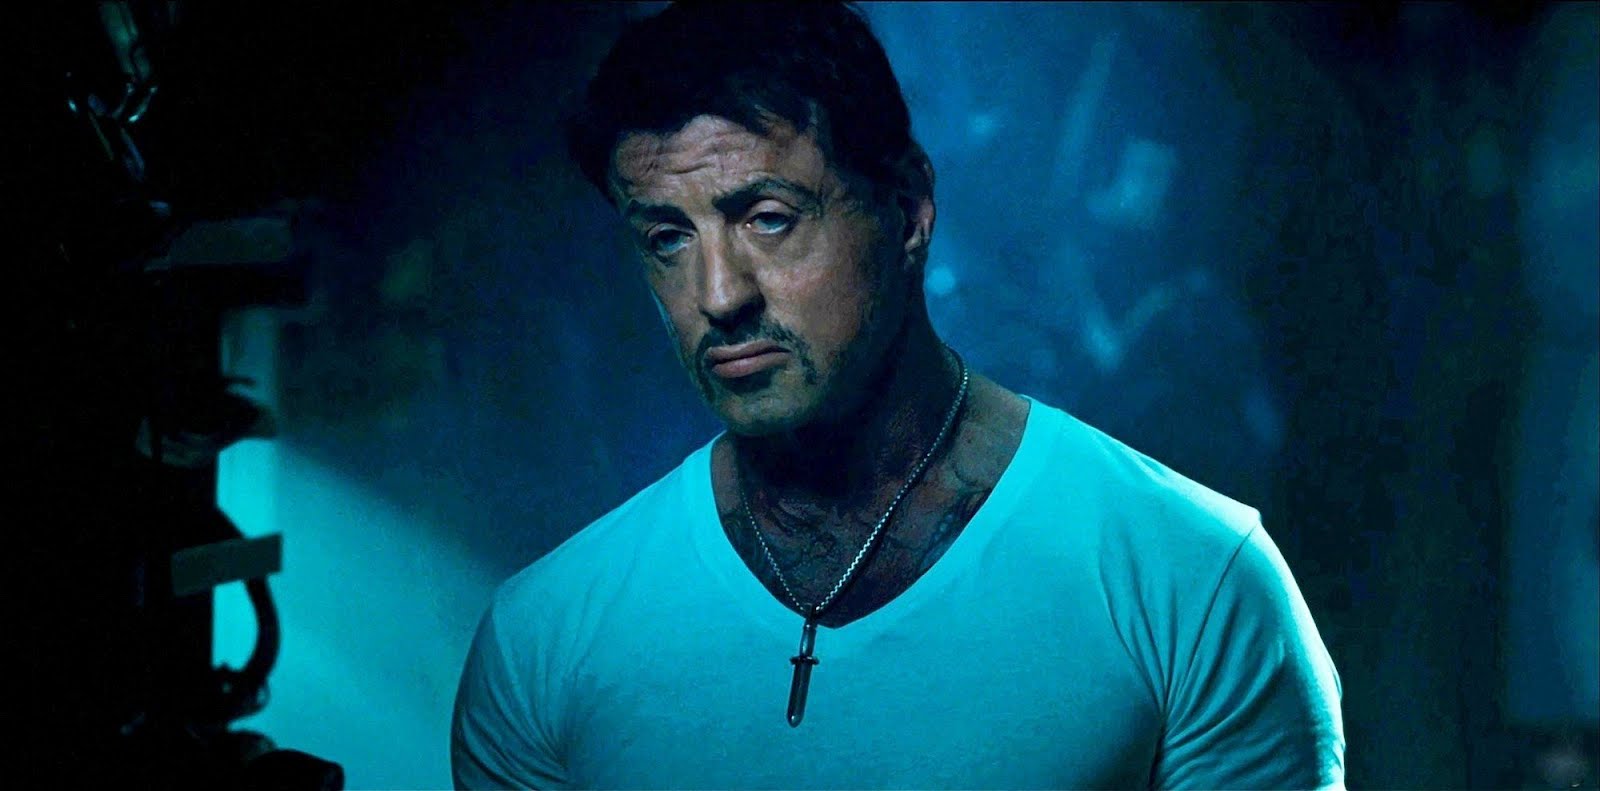 The-Expendables-2-2012-Sylvester-Stallone-4.jpg